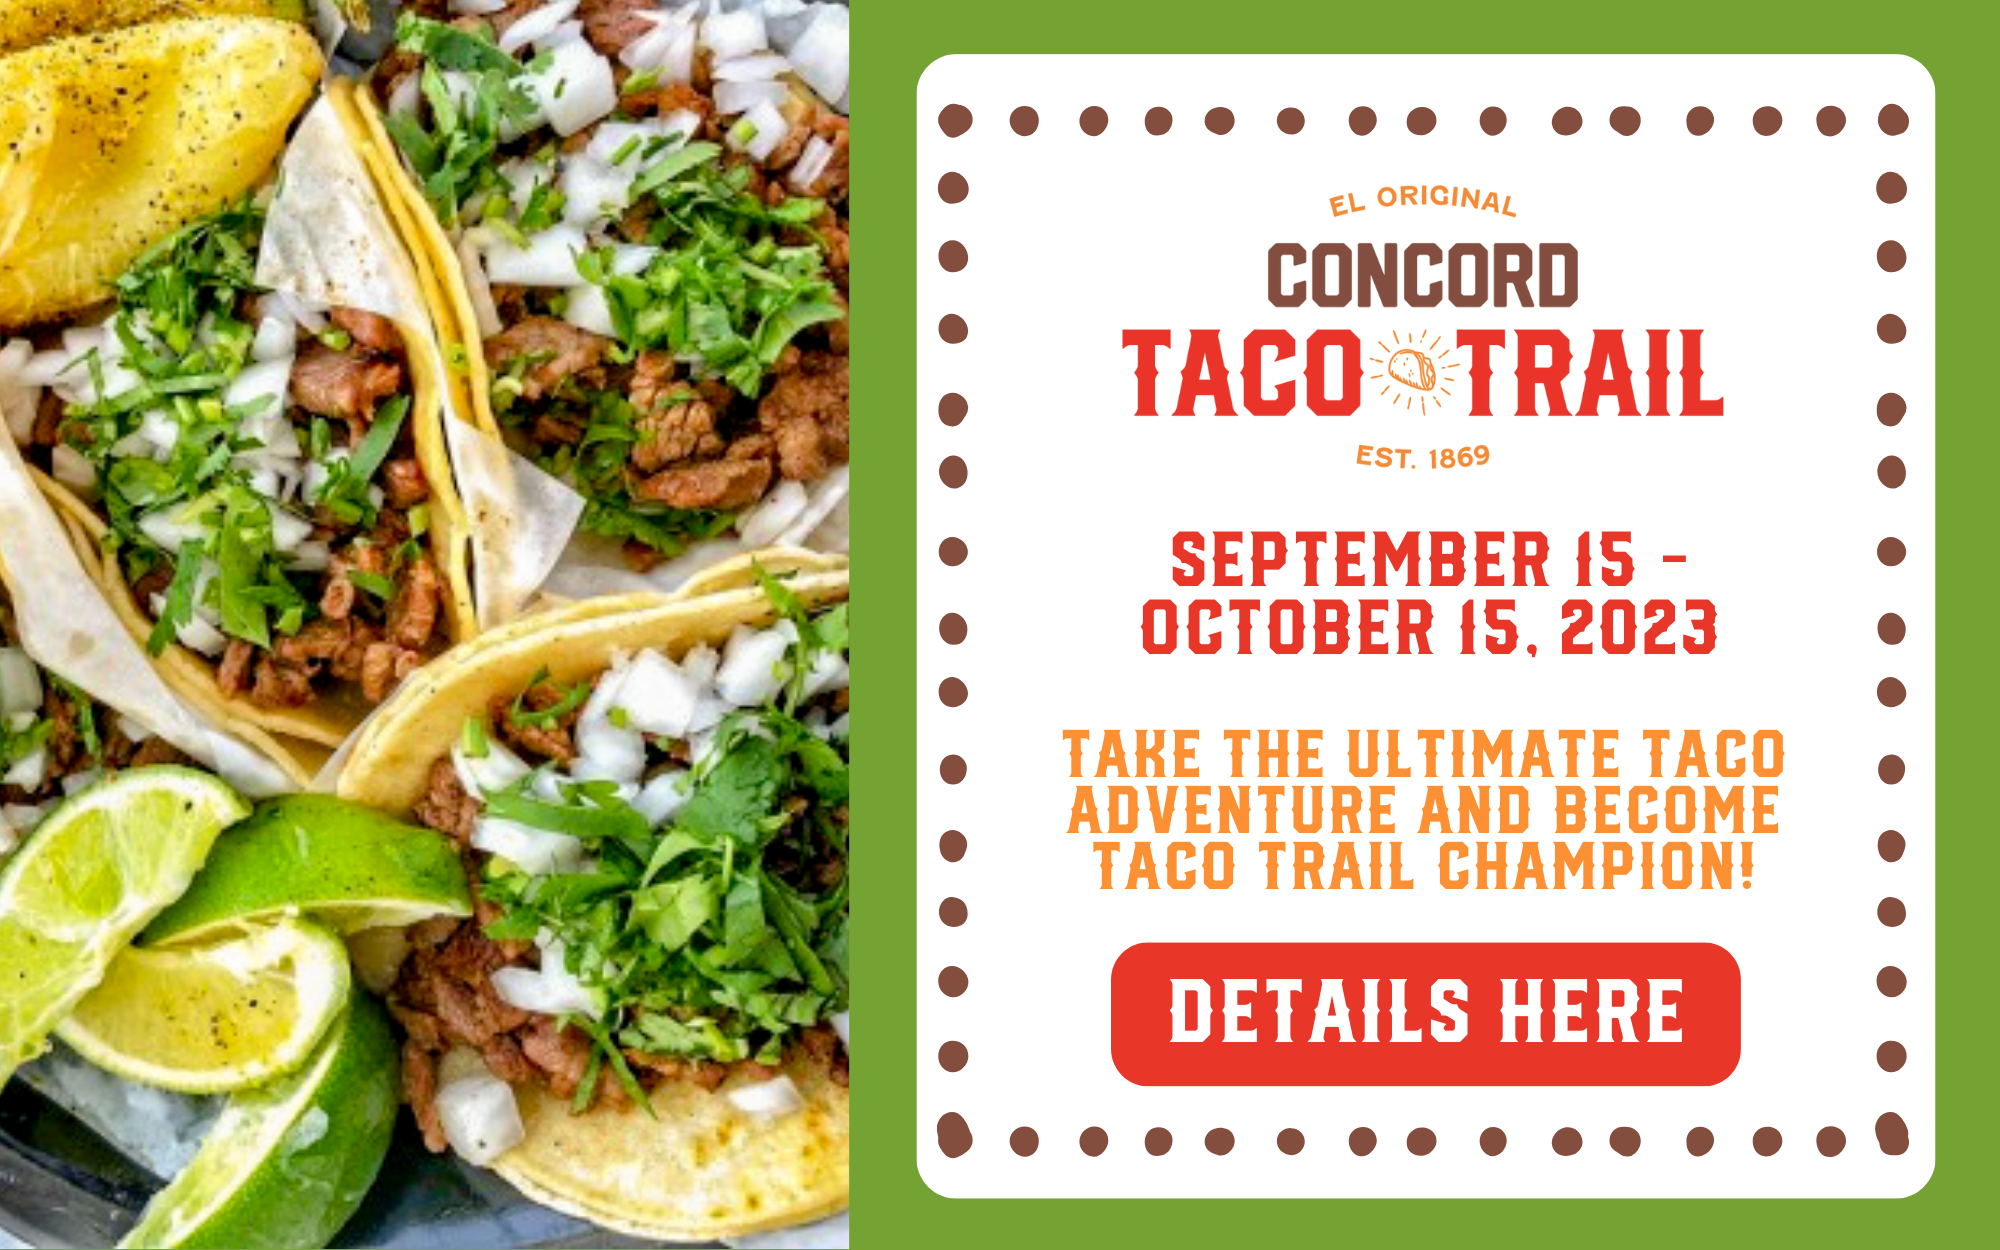 <h1 class="tribe-events-single-event-title">Concord Taco Trail 2023</h1>